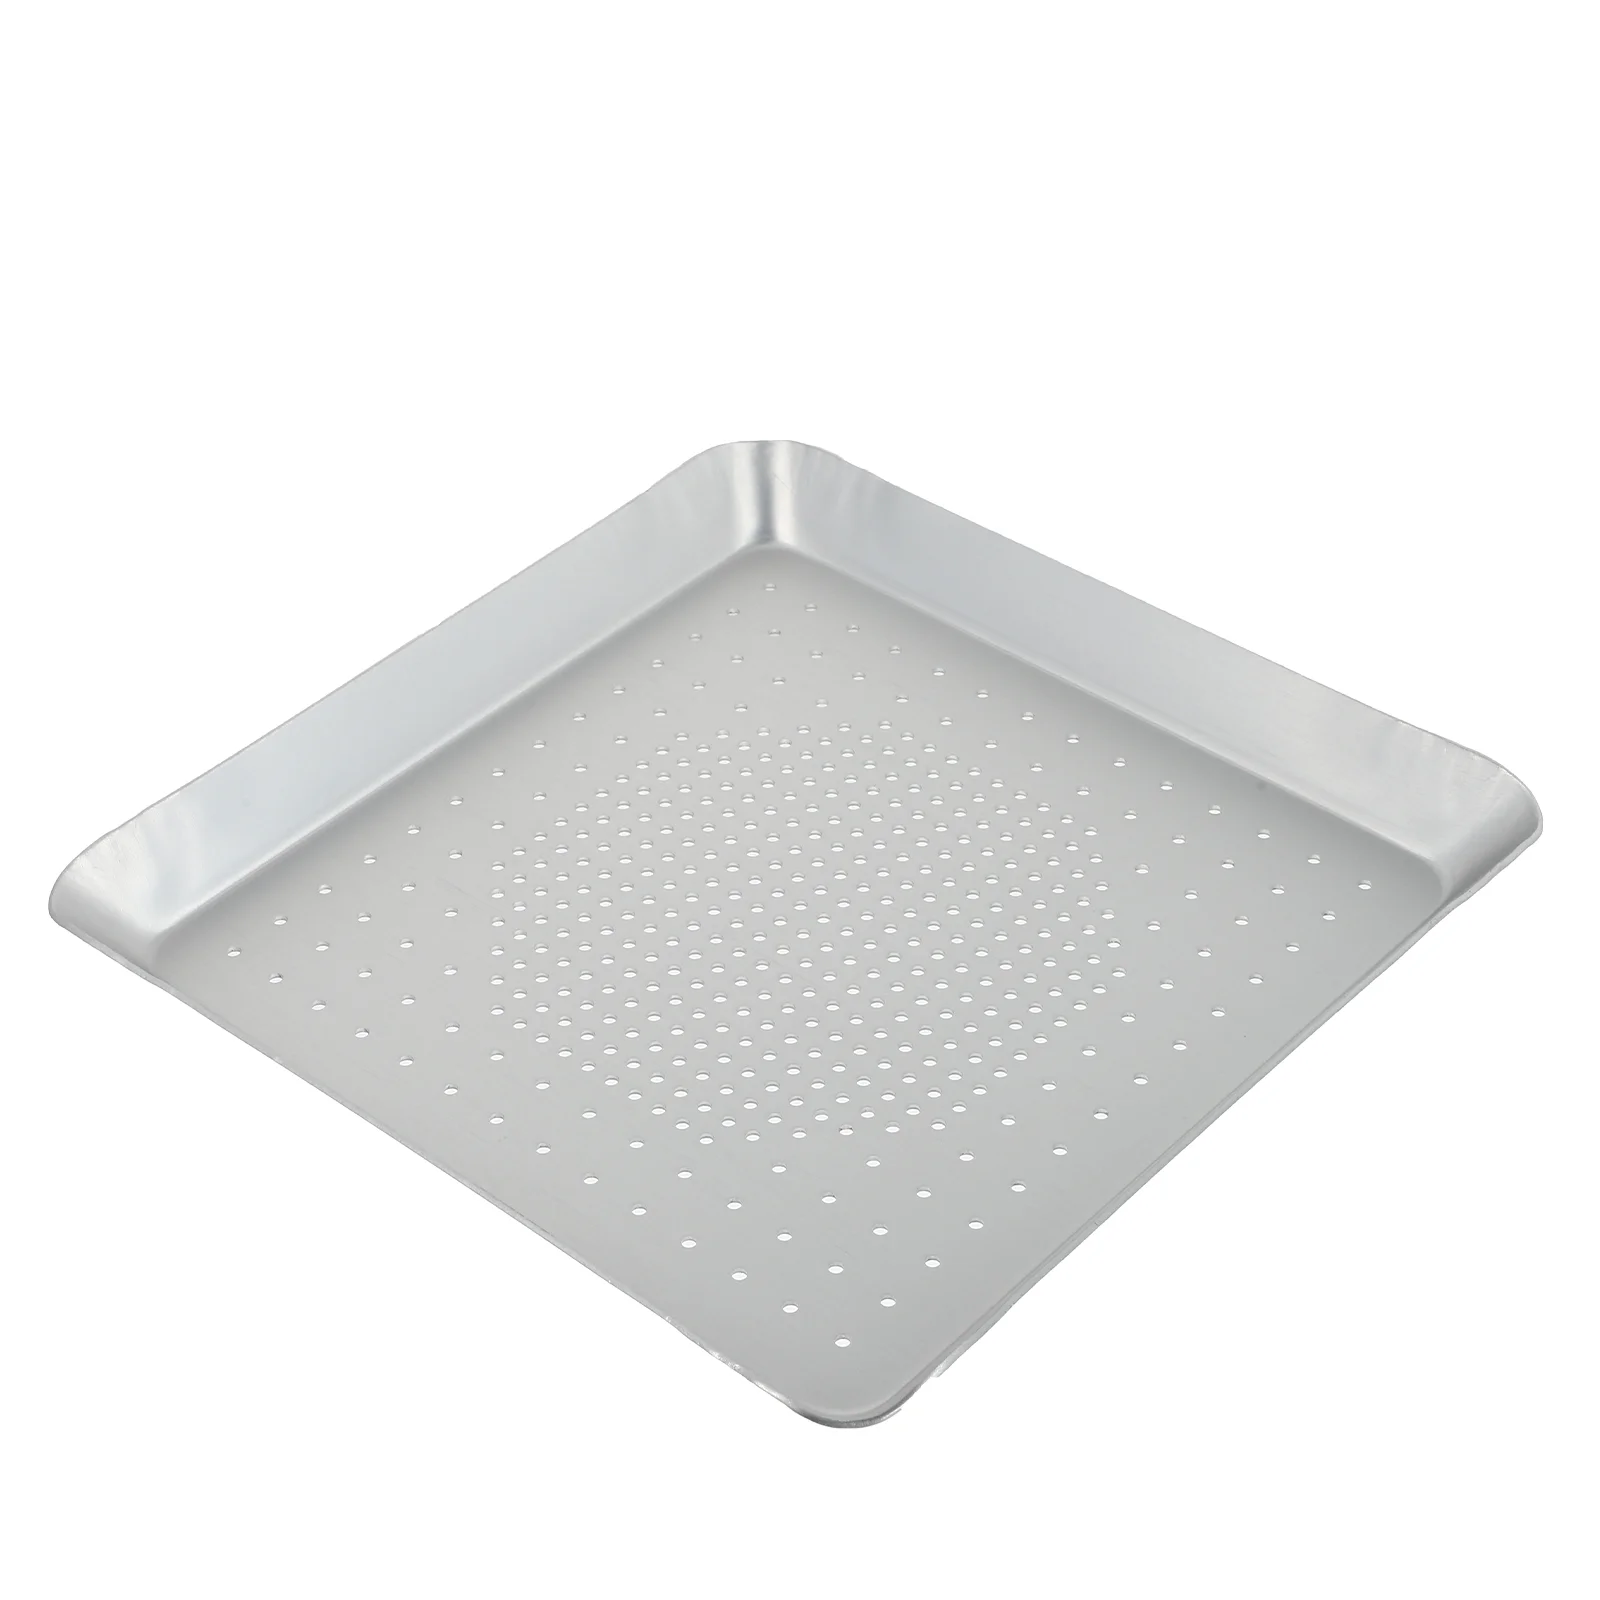 

Pizza Pan Tray Baking Square Oven Holes Crisper Non Stick Mesh Plate Perforated Cake Bakeware Pie Steel Kitchen Screen Sheet